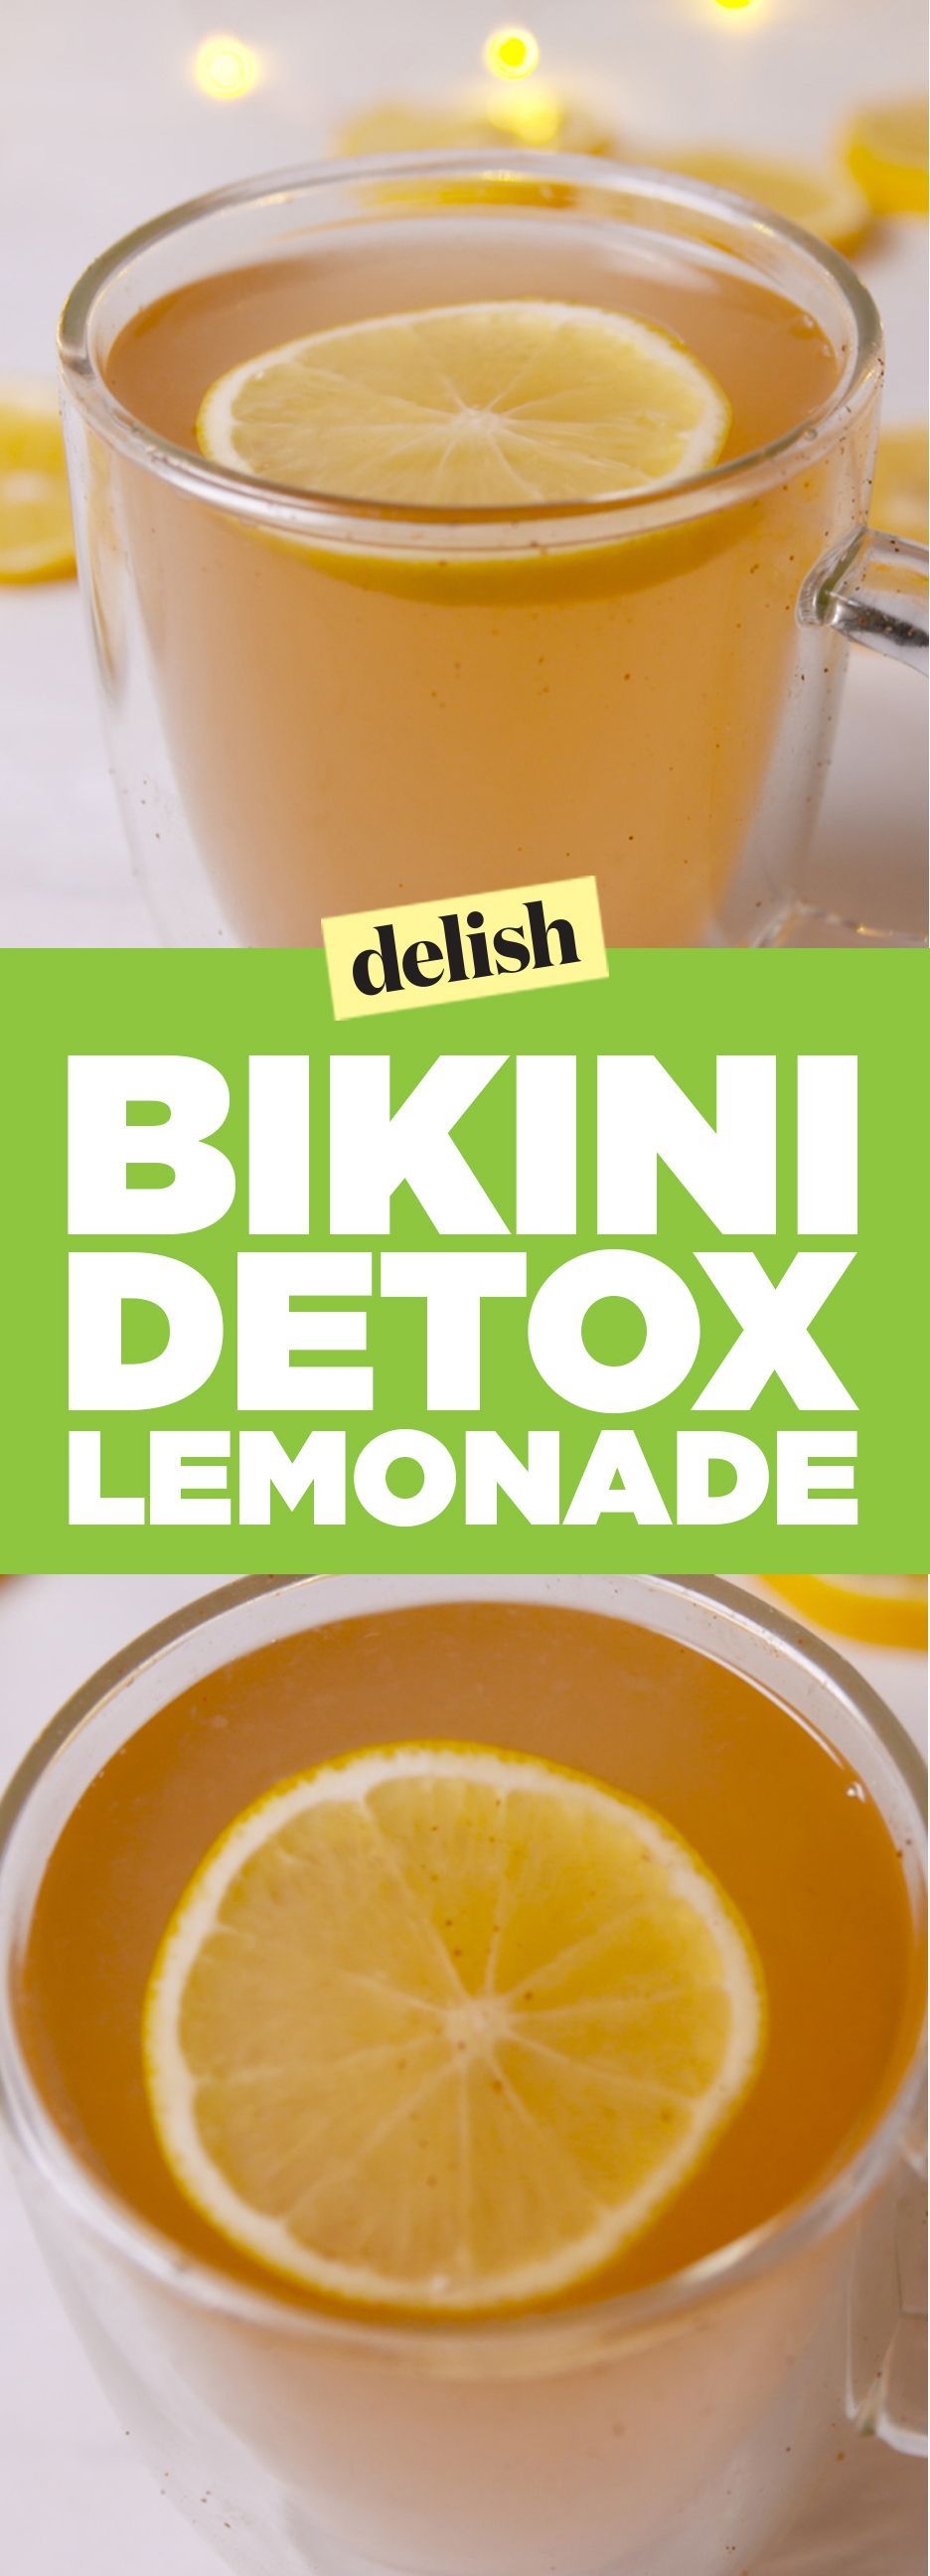 Bikini detox lemonade is the perfect morning drink before a day at the beach. Get the recipe on Delish.com.